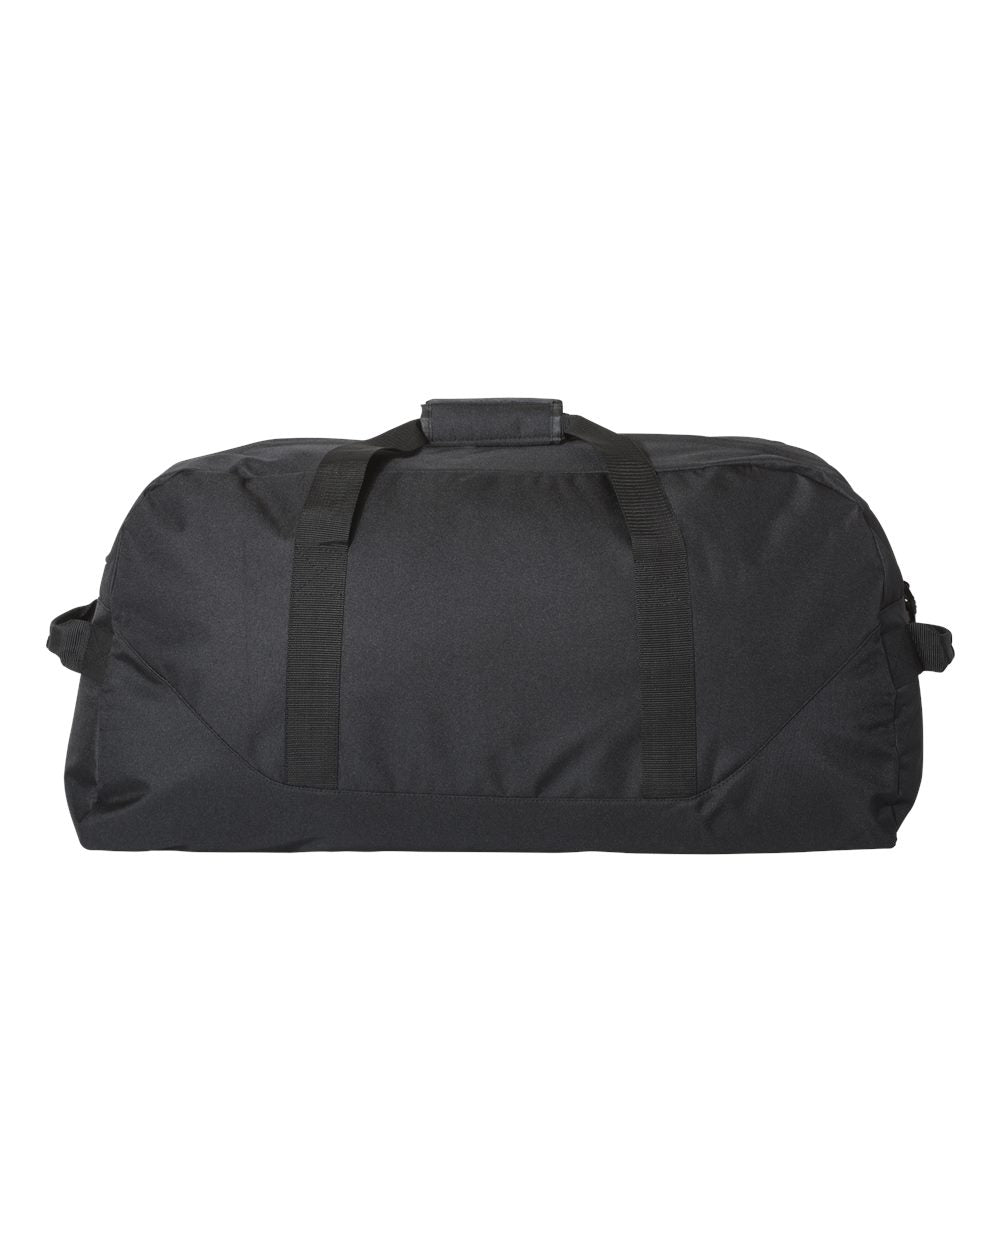 Two Colors -- Extra Large Recycled Polyester Duffel Bag, Various Colors